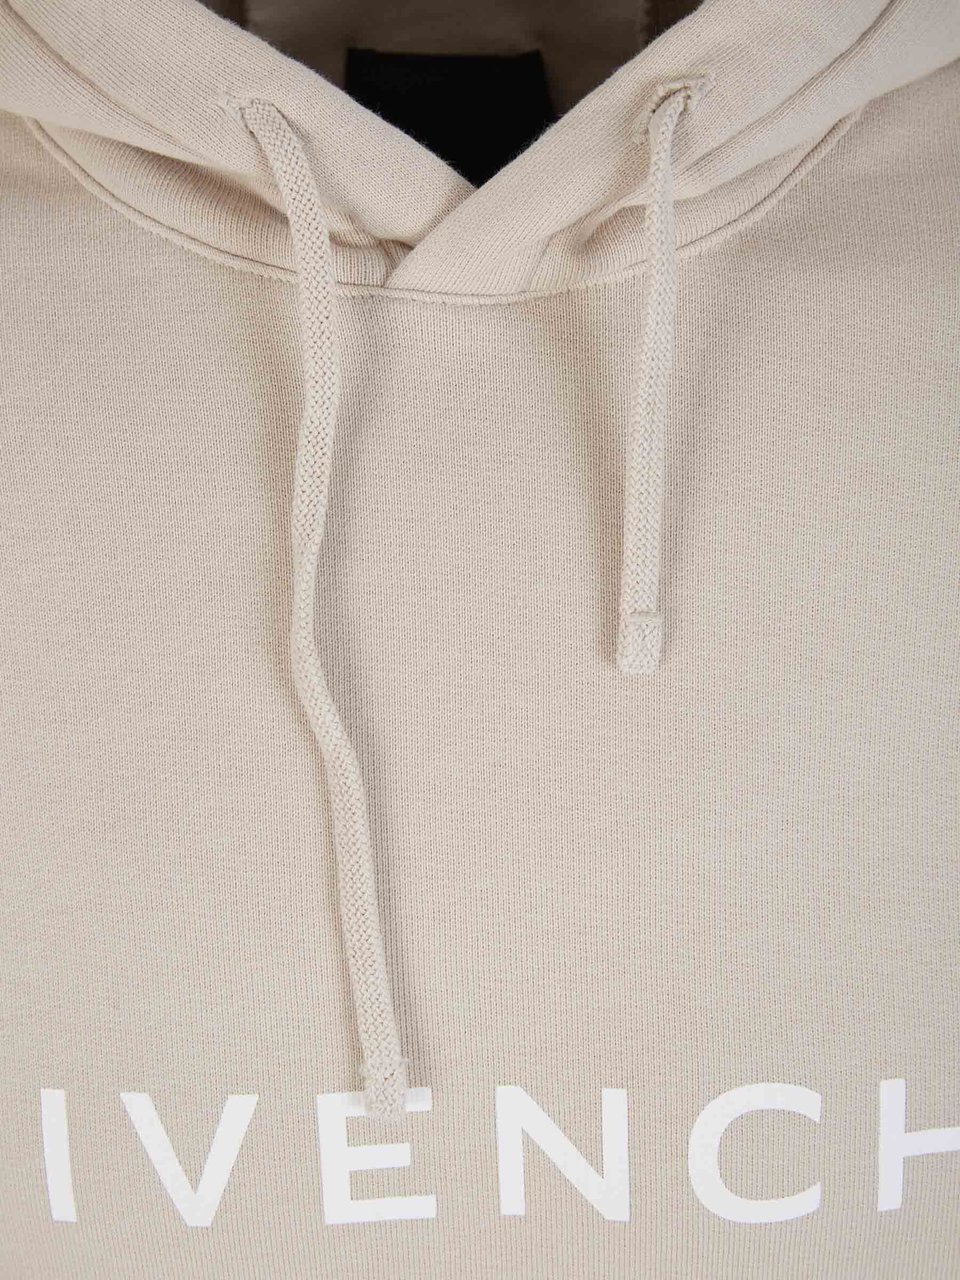 Givenchy Archetype Hoodie Beige